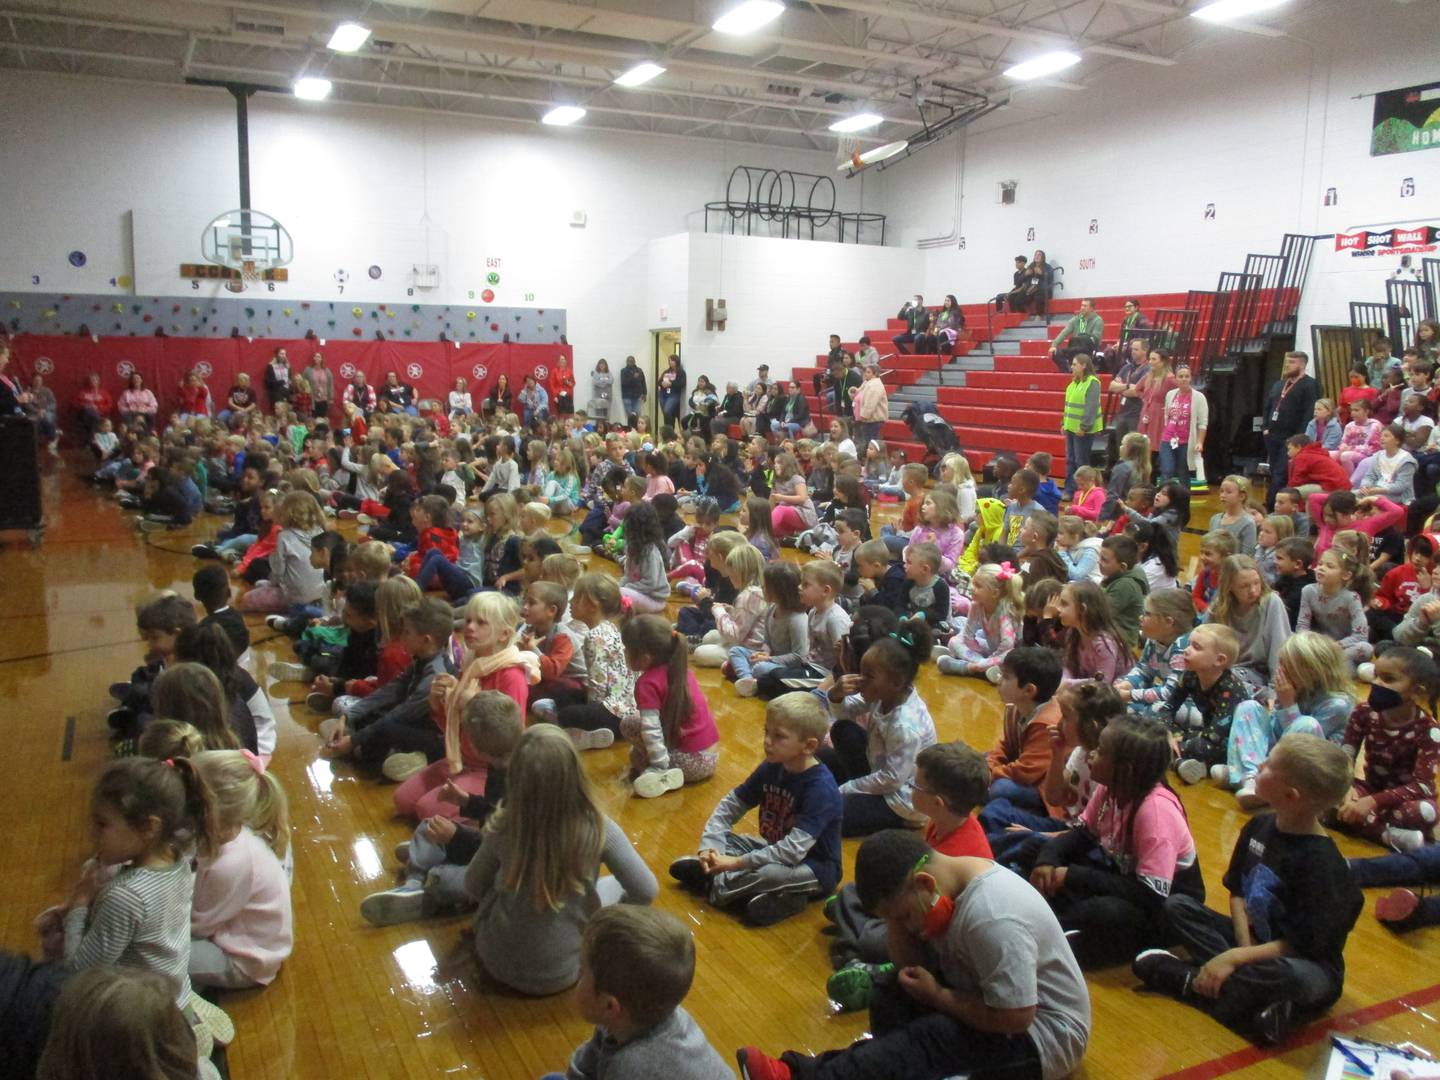 Yorkville Circle Center Grade School students, parents and teachers fill the school gymnasium for the Hispanic Heritage Month assembly on Oct. 14, 2022.